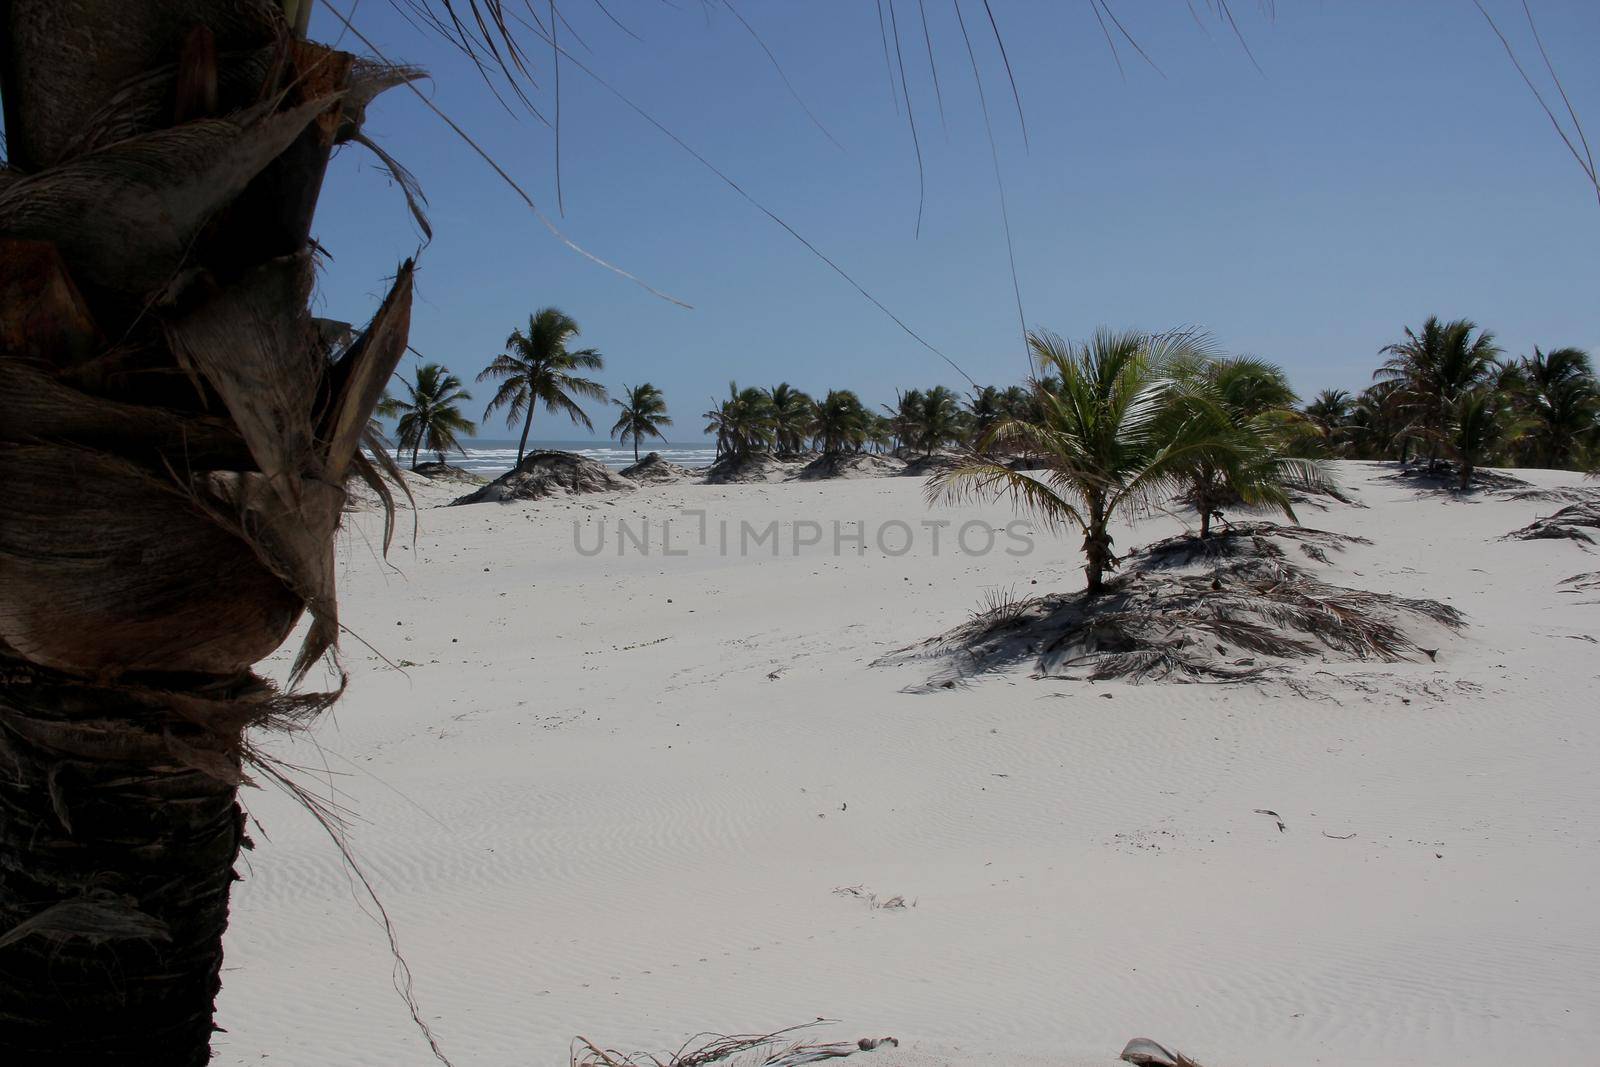 jandaira, bahia / brazil - december 24, 2013: coconut trees are seen by the sand dunes of Mangue-Seco, in the municipality of Jandaira.